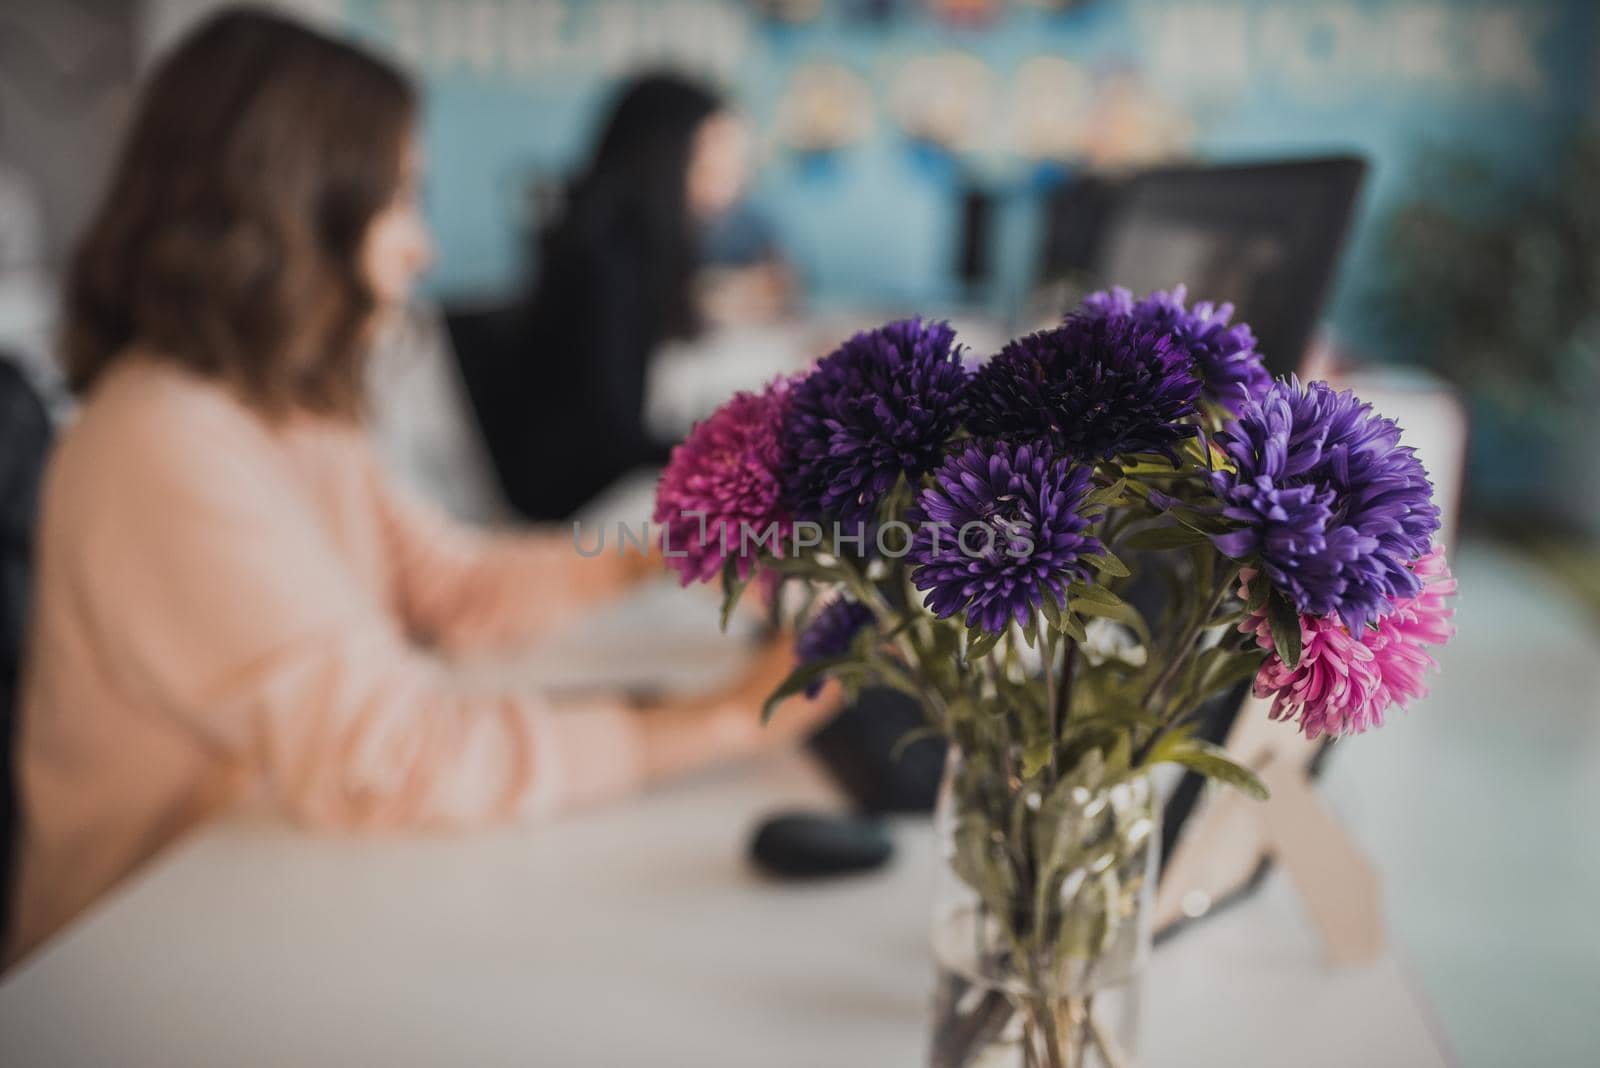 A bouquet of multi-colored pink and purple flowers on the background of a woman working at the computer.